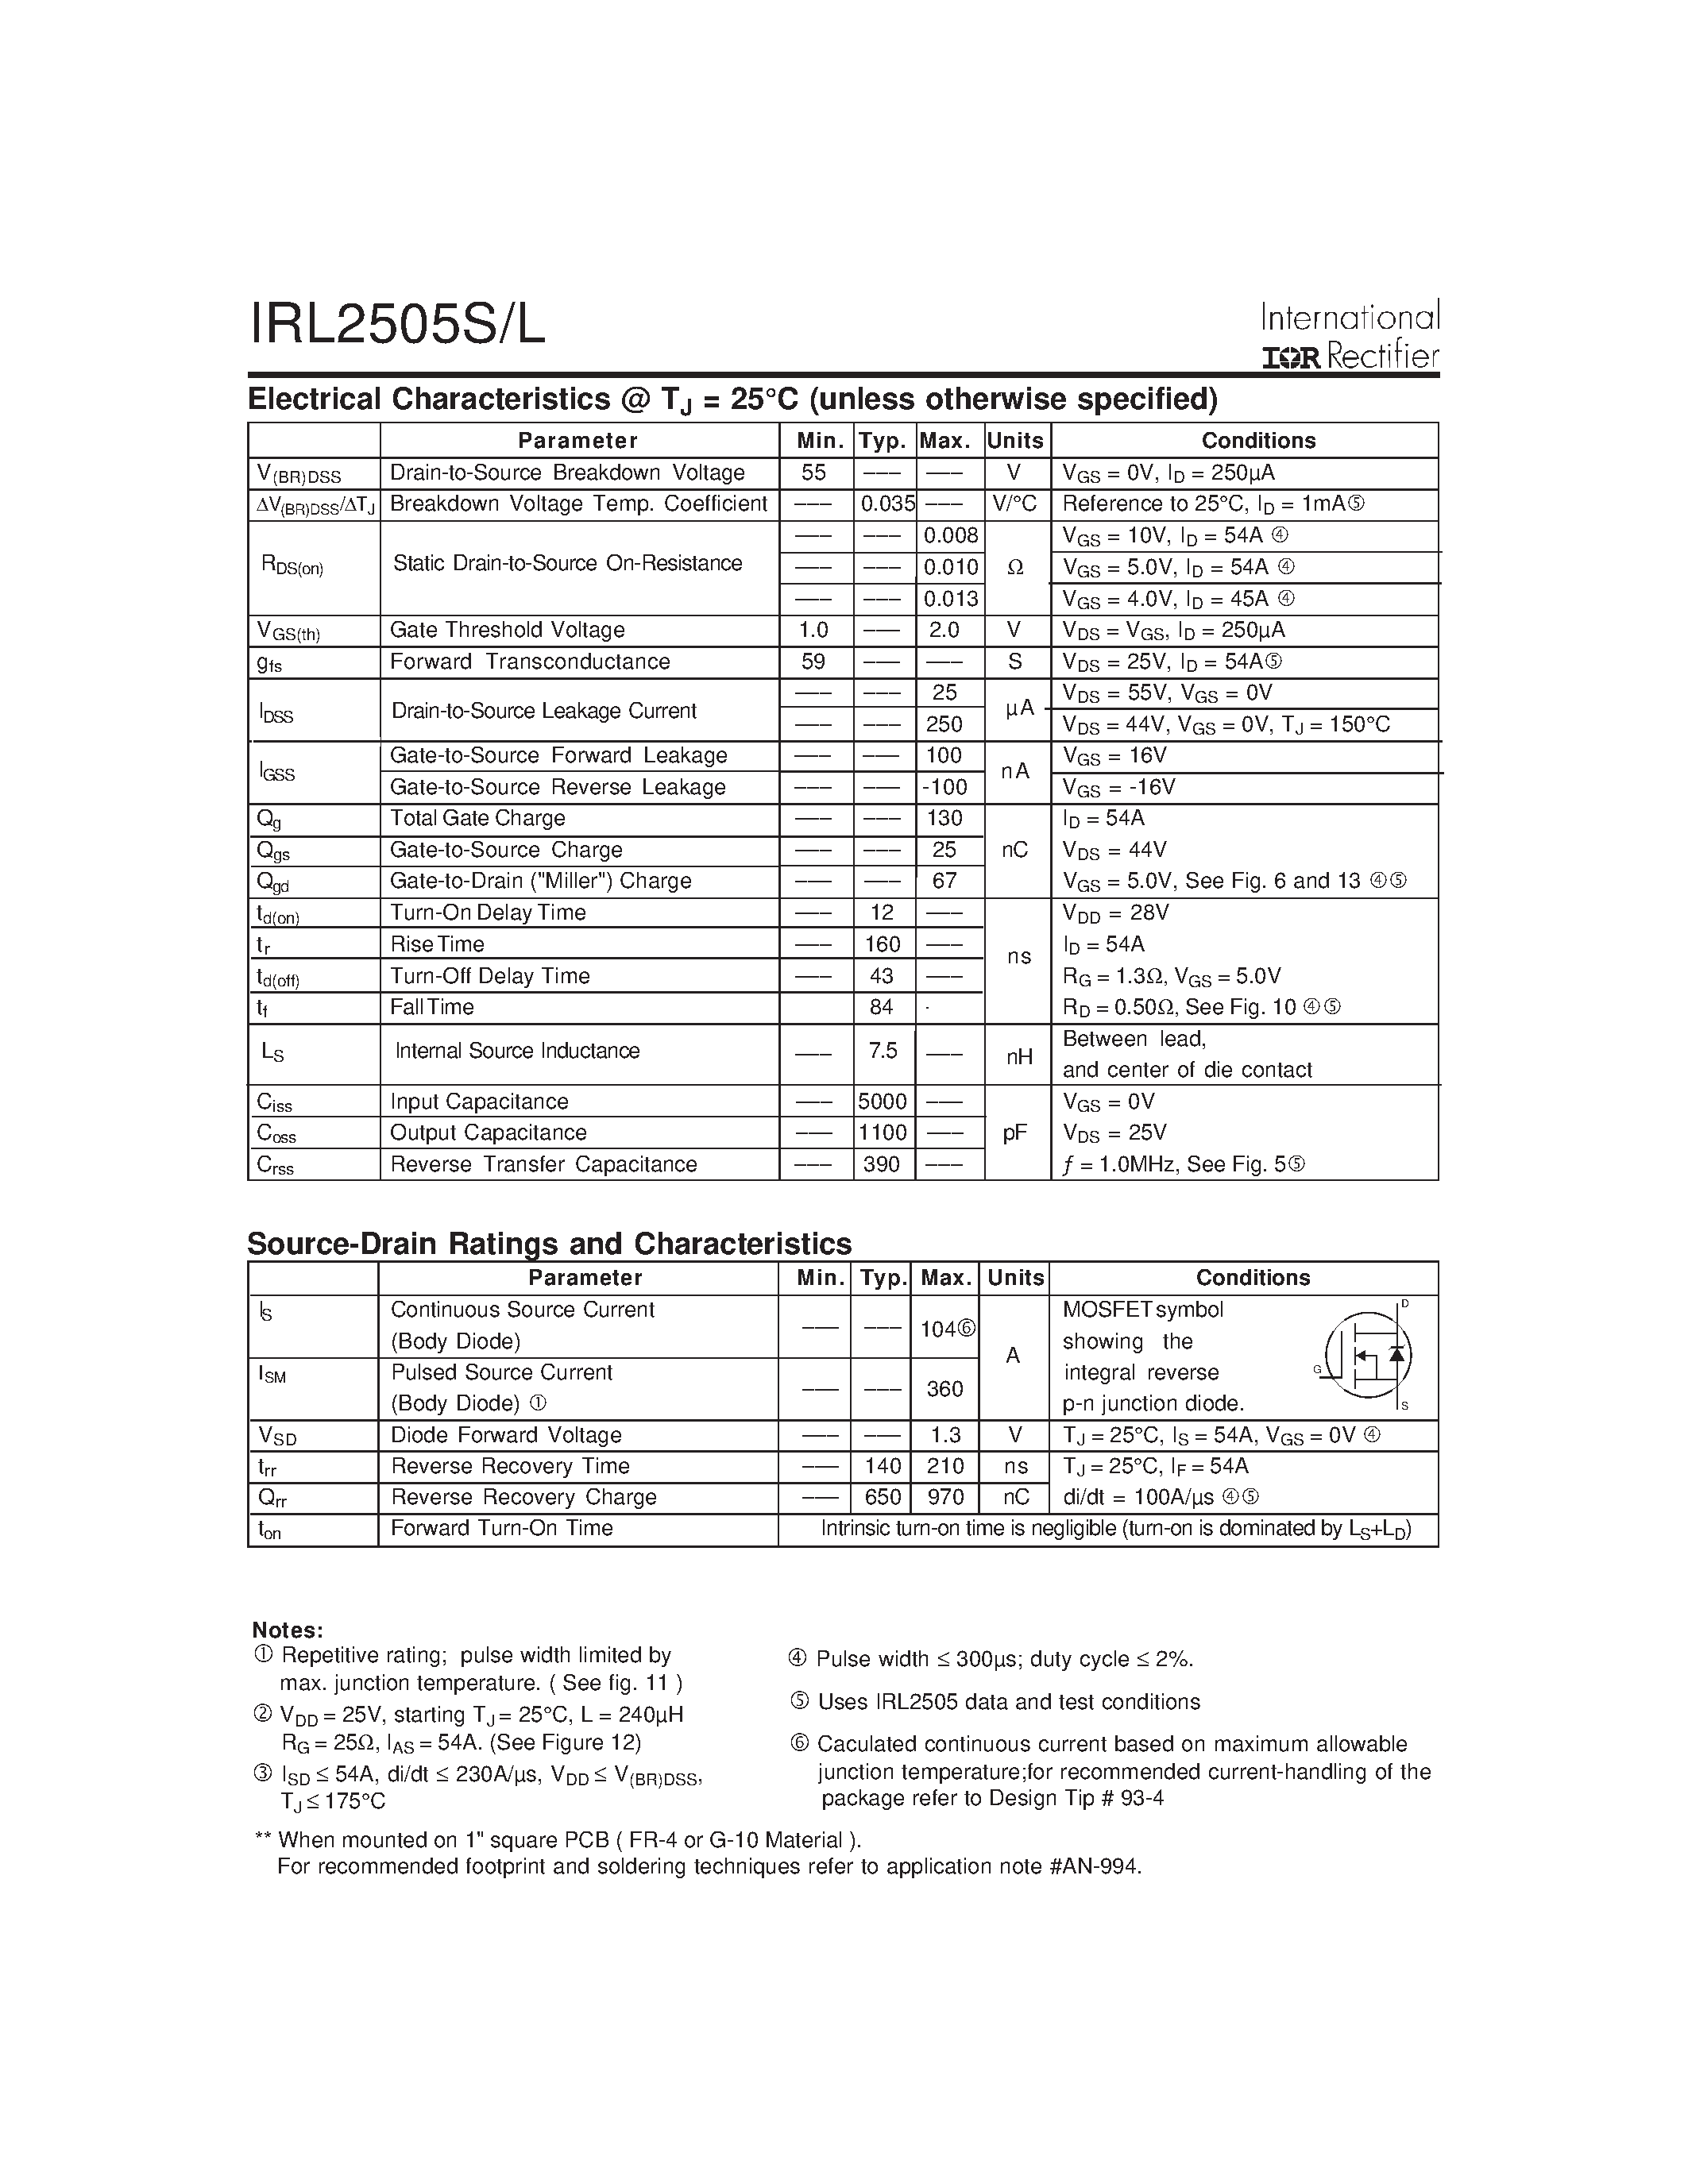 Datasheet IRL2505L - Power MOSFET page 2